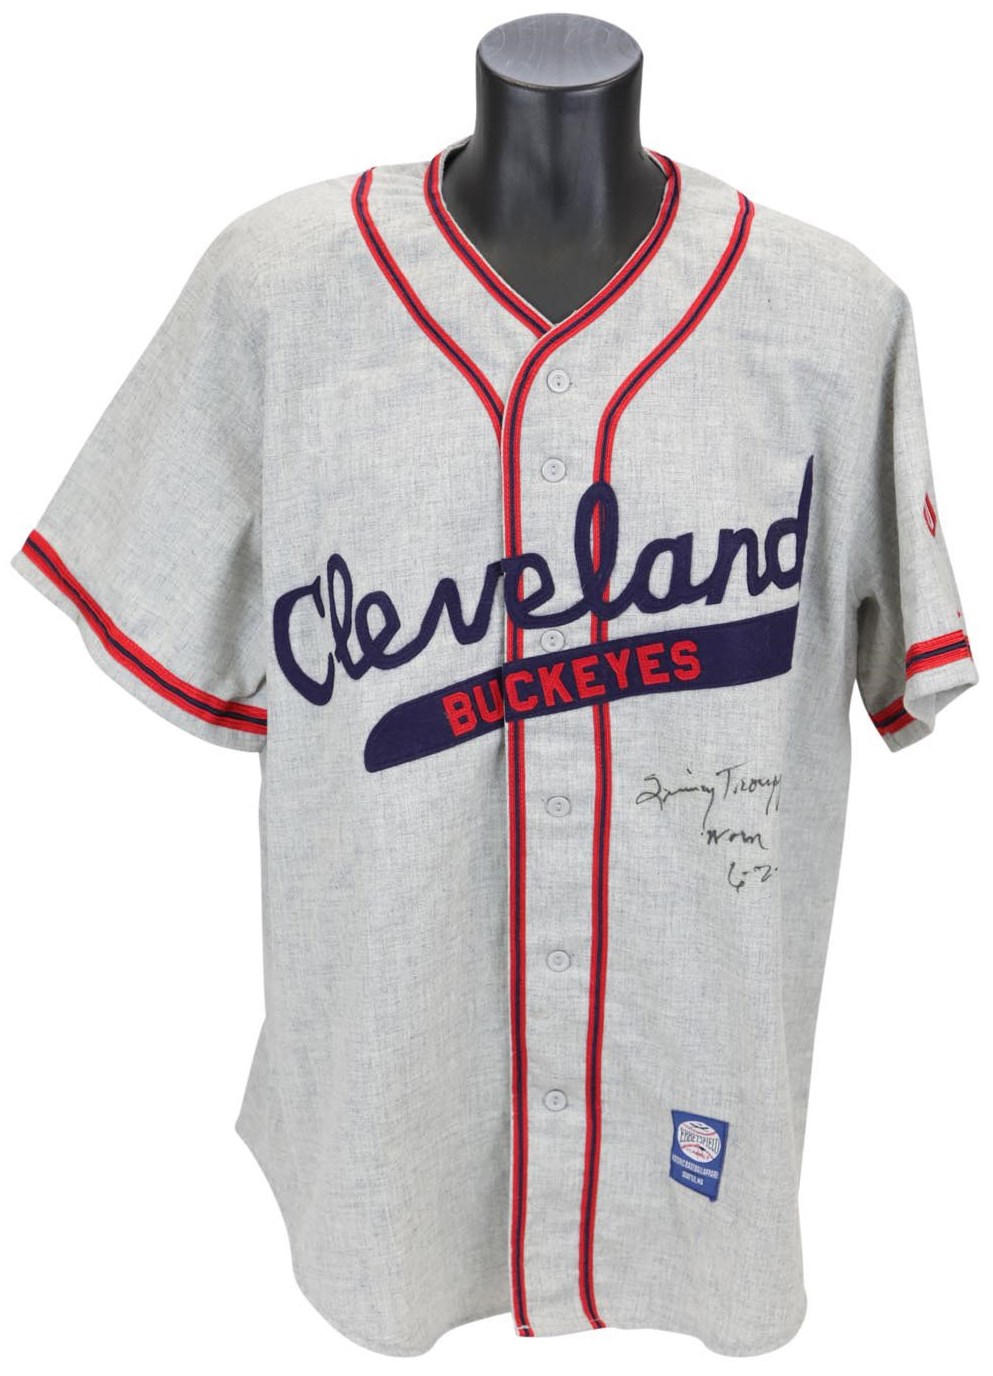 1992 Quincy Trouppe Cleveland Buckeyes Signed "Game Worn" Jersey (Shea Stadium)